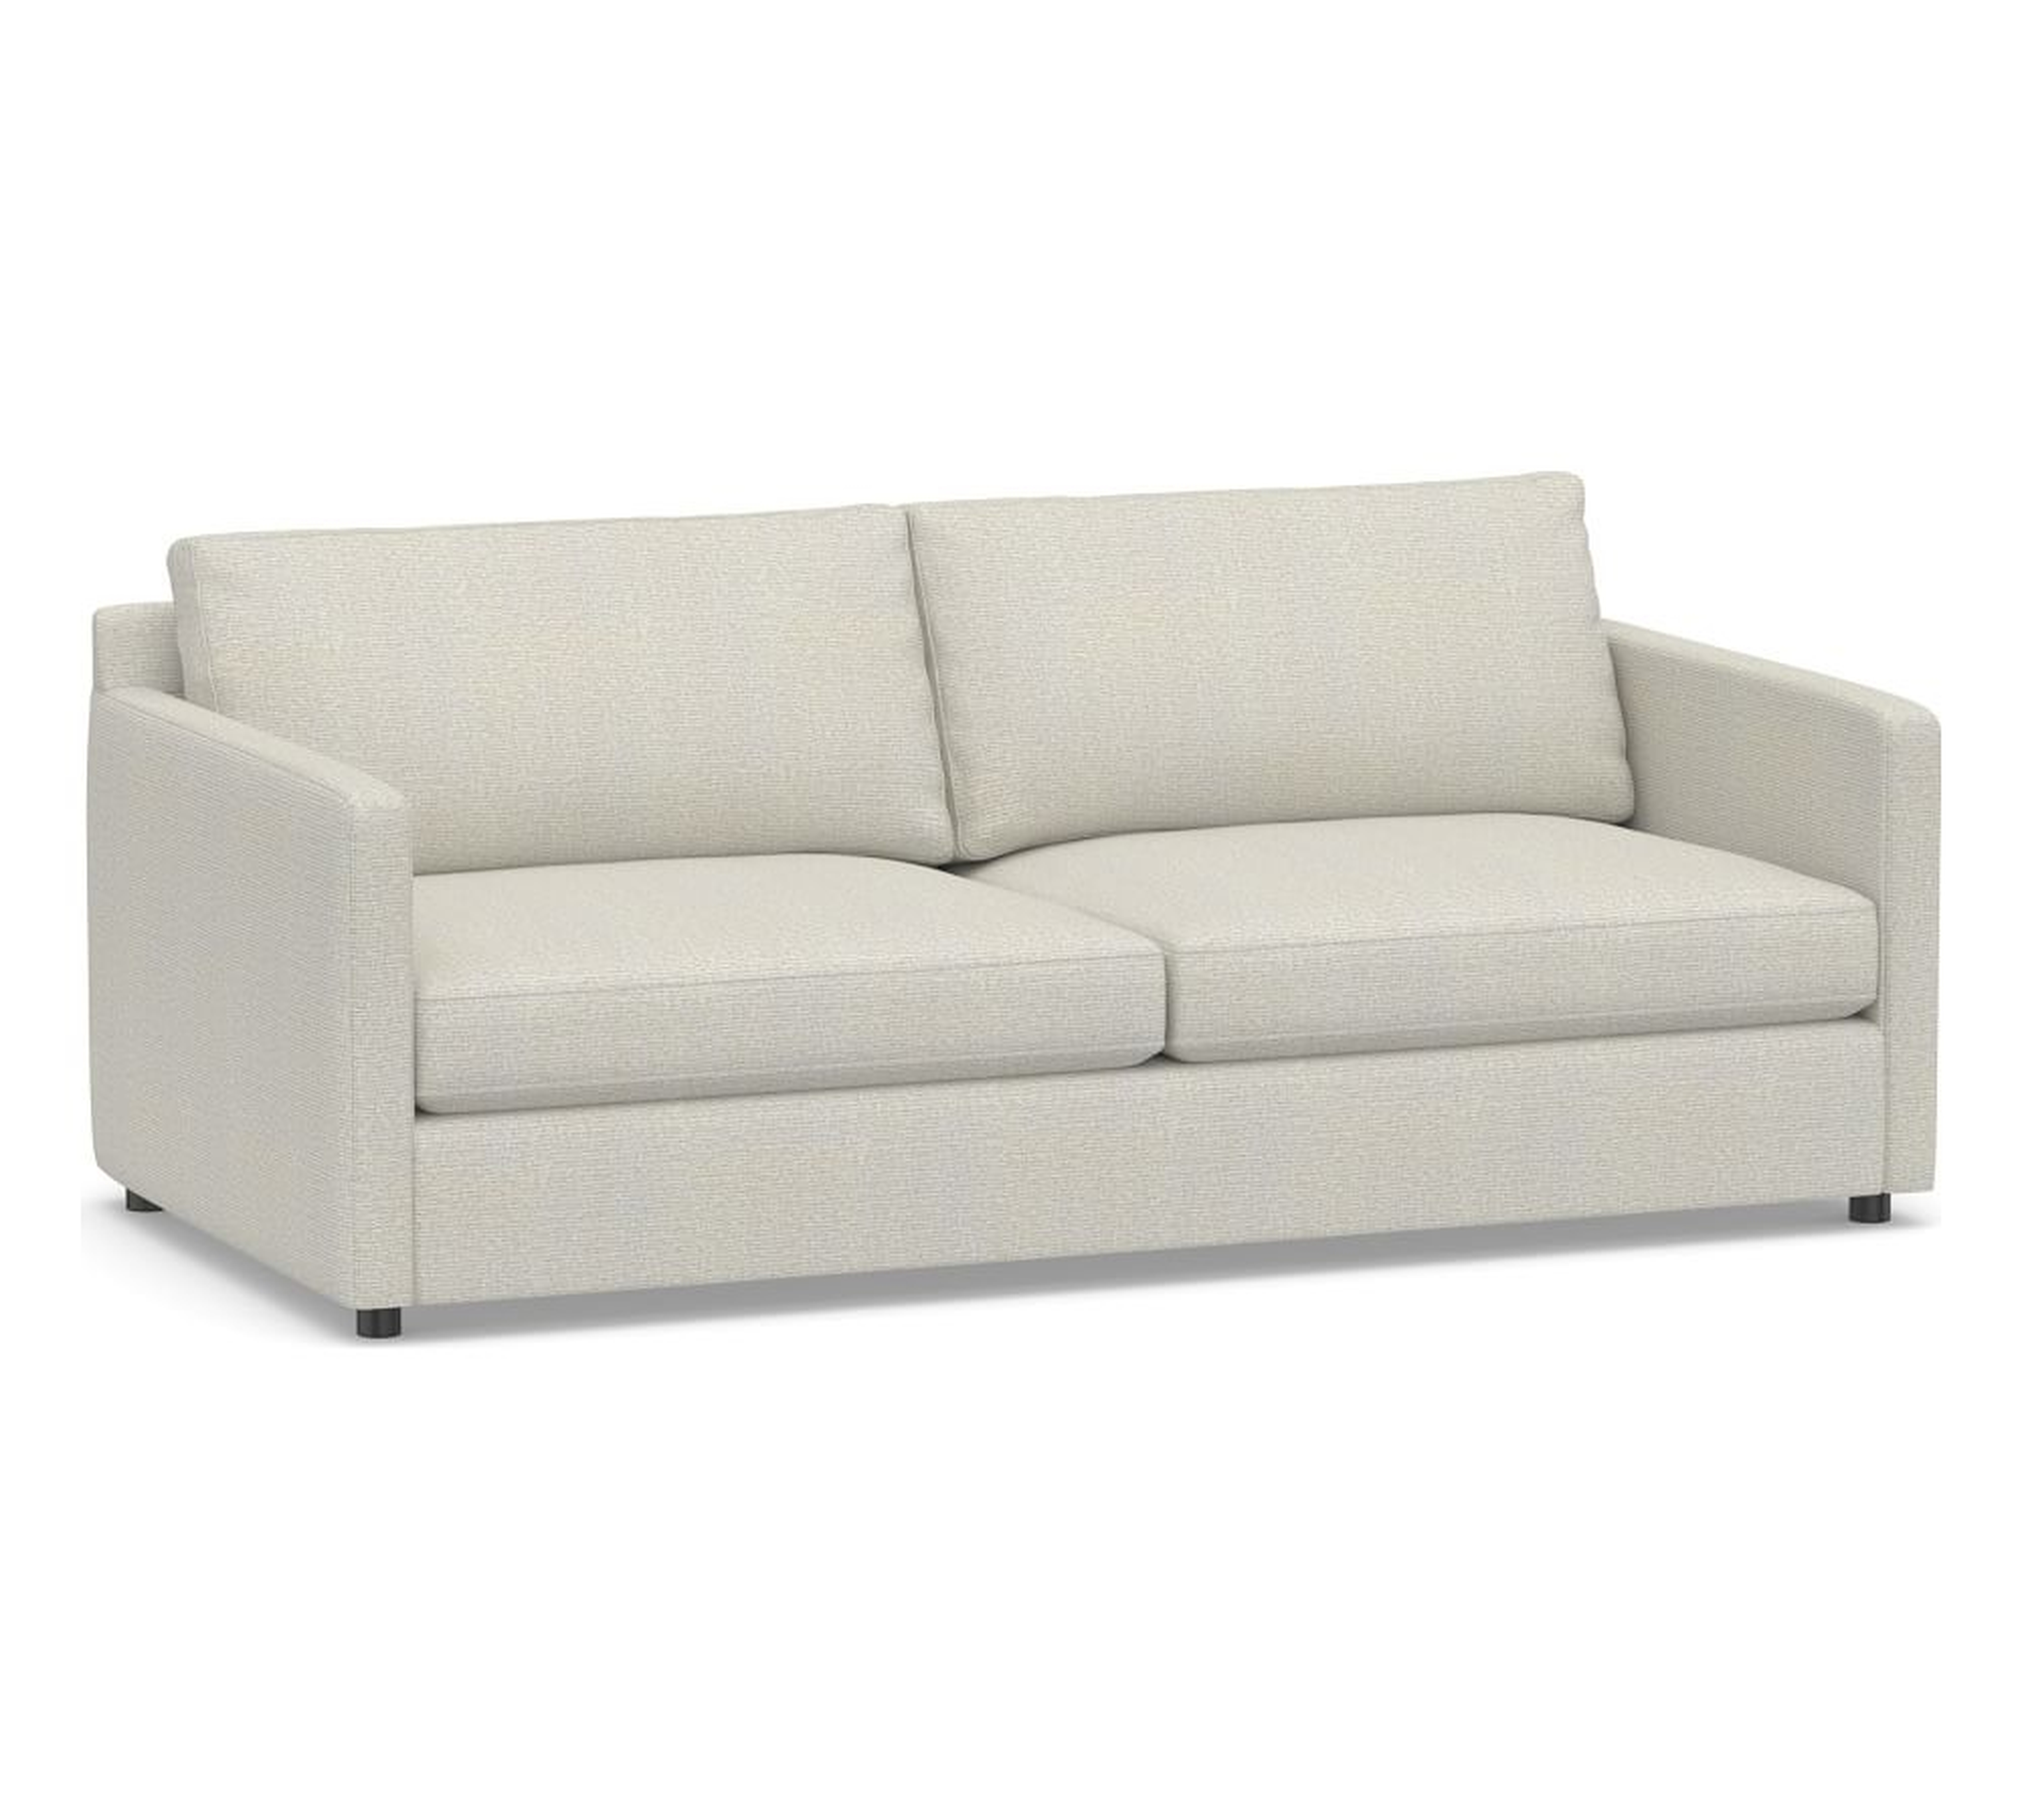 Pacifica Square Arm Upholstered Sofa 79.5", Polyester Wrapped Cushions, Performance Heathered Basketweave Dove - Pottery Barn